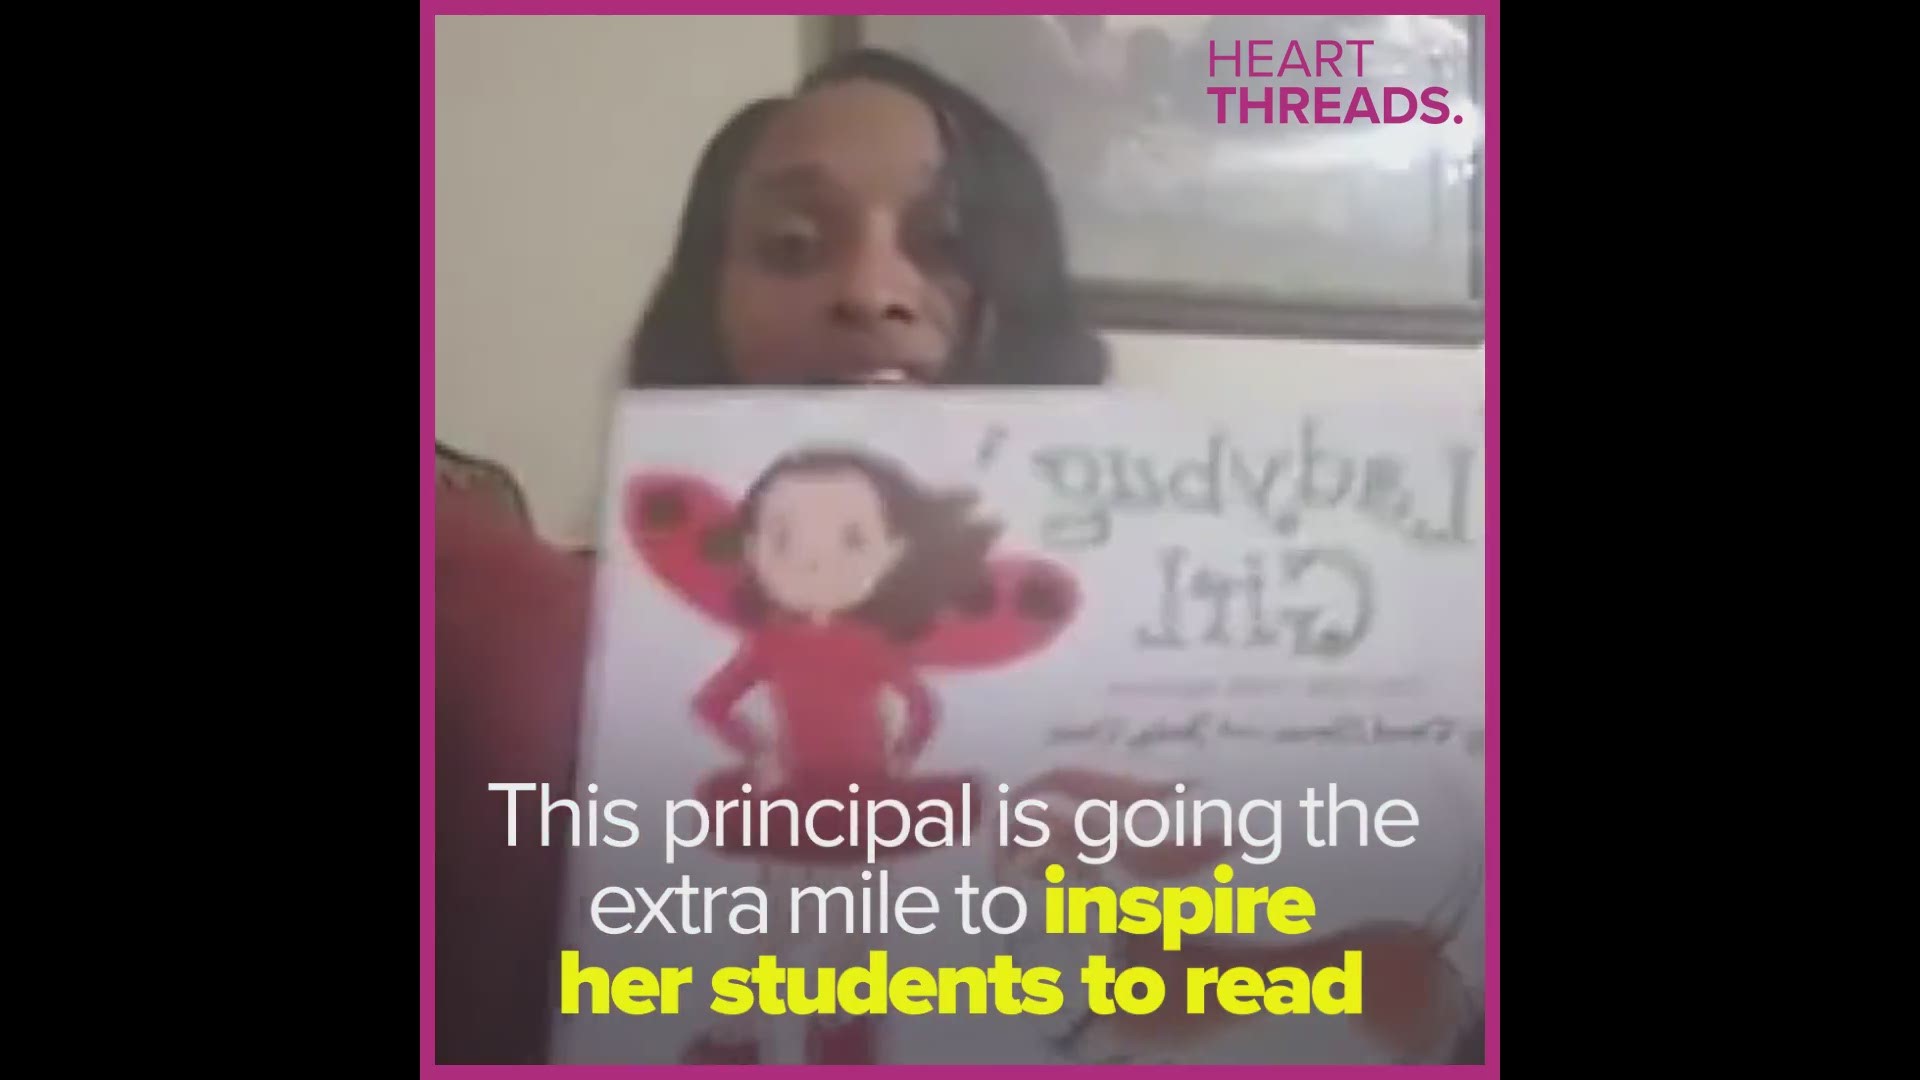 This principal is reading a bedtime story for her students every week using Facebook Live.